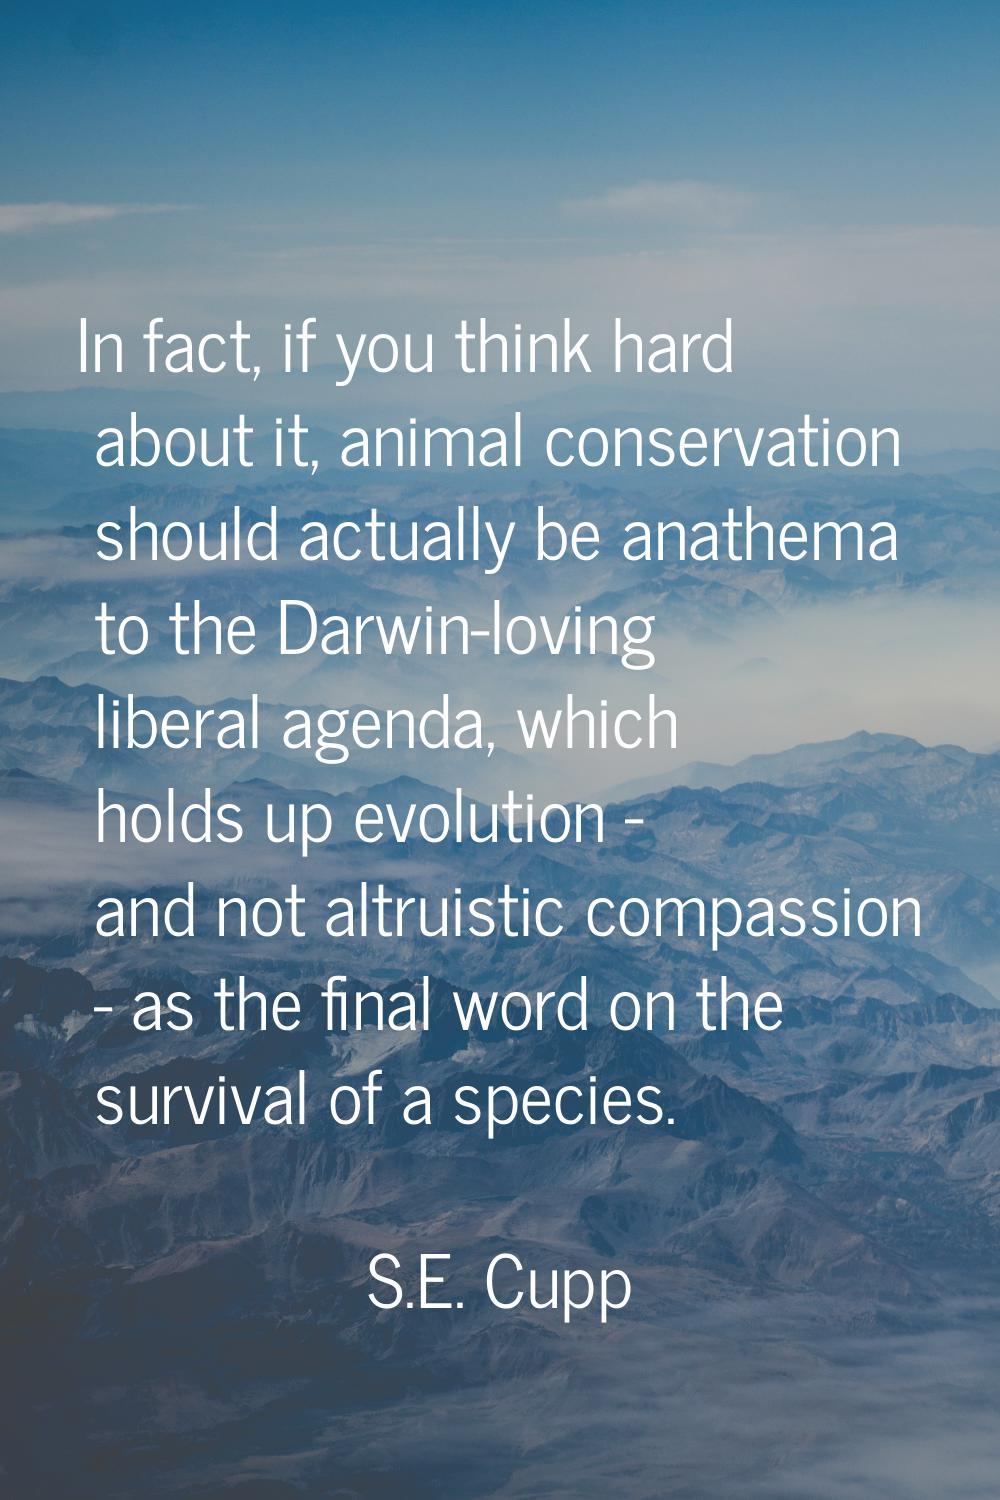 In fact, if you think hard about it, animal conservation should actually be anathema to the Darwin-